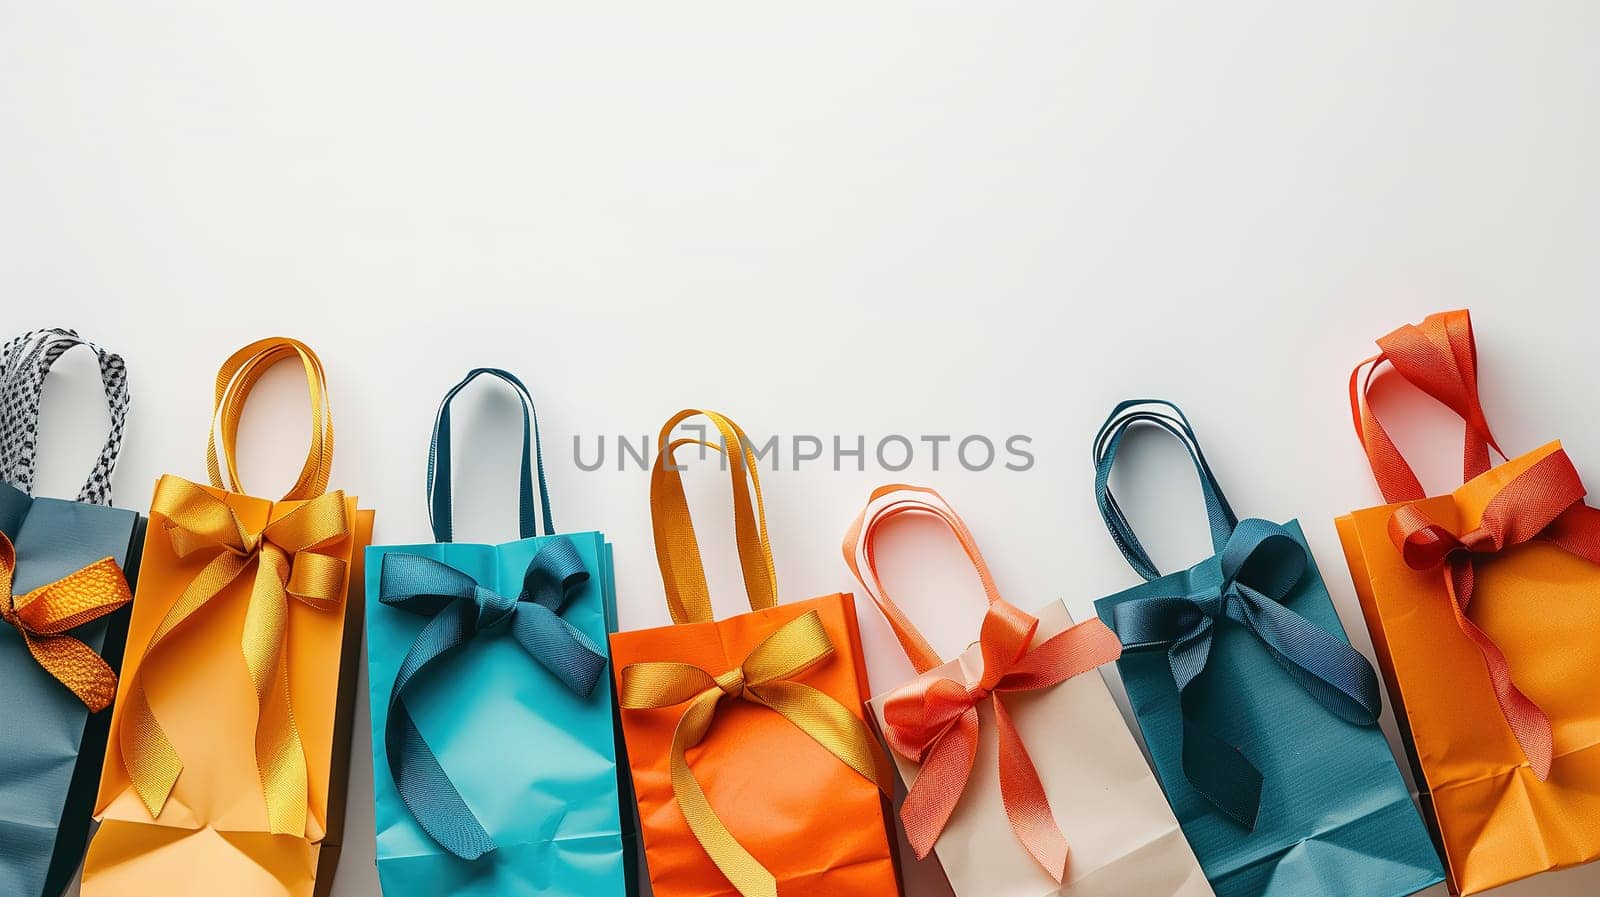 A row of vibrant bags with bows displayed at a sale event, illustrating the concept of a Black Friday sale. Each bag is uniquely colored and adorned with a bow, ready for shoppers to purchase.